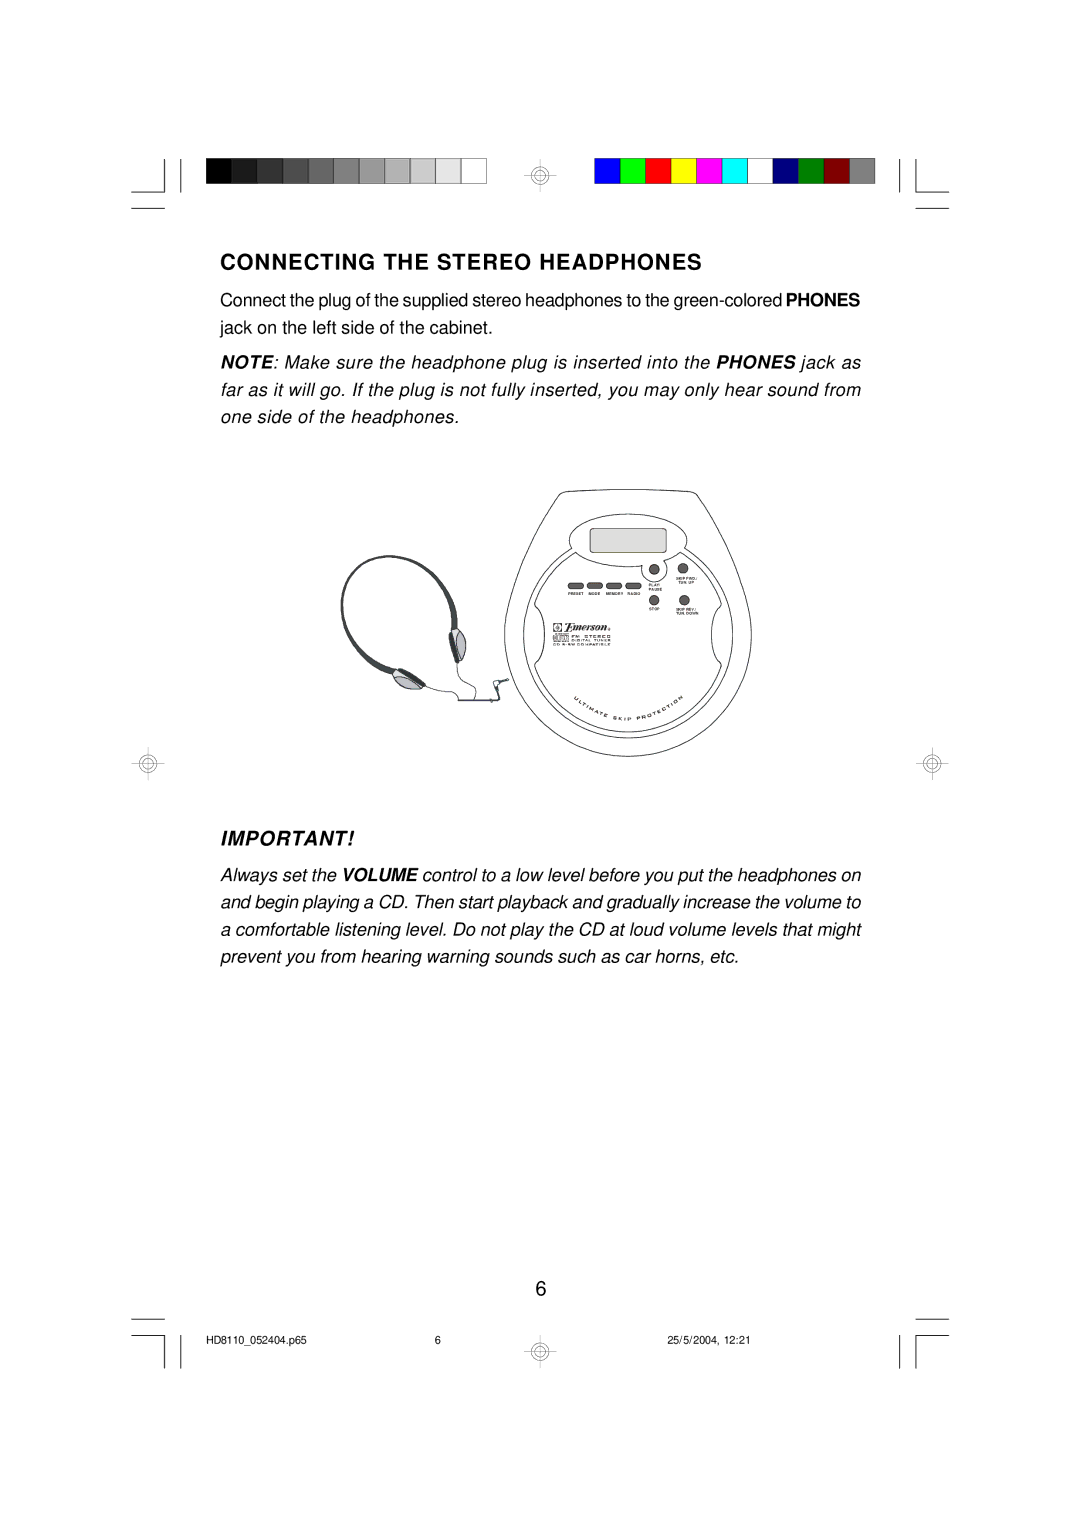 Emerson HD8110 owner manual Connecting the Stereo Headphones 